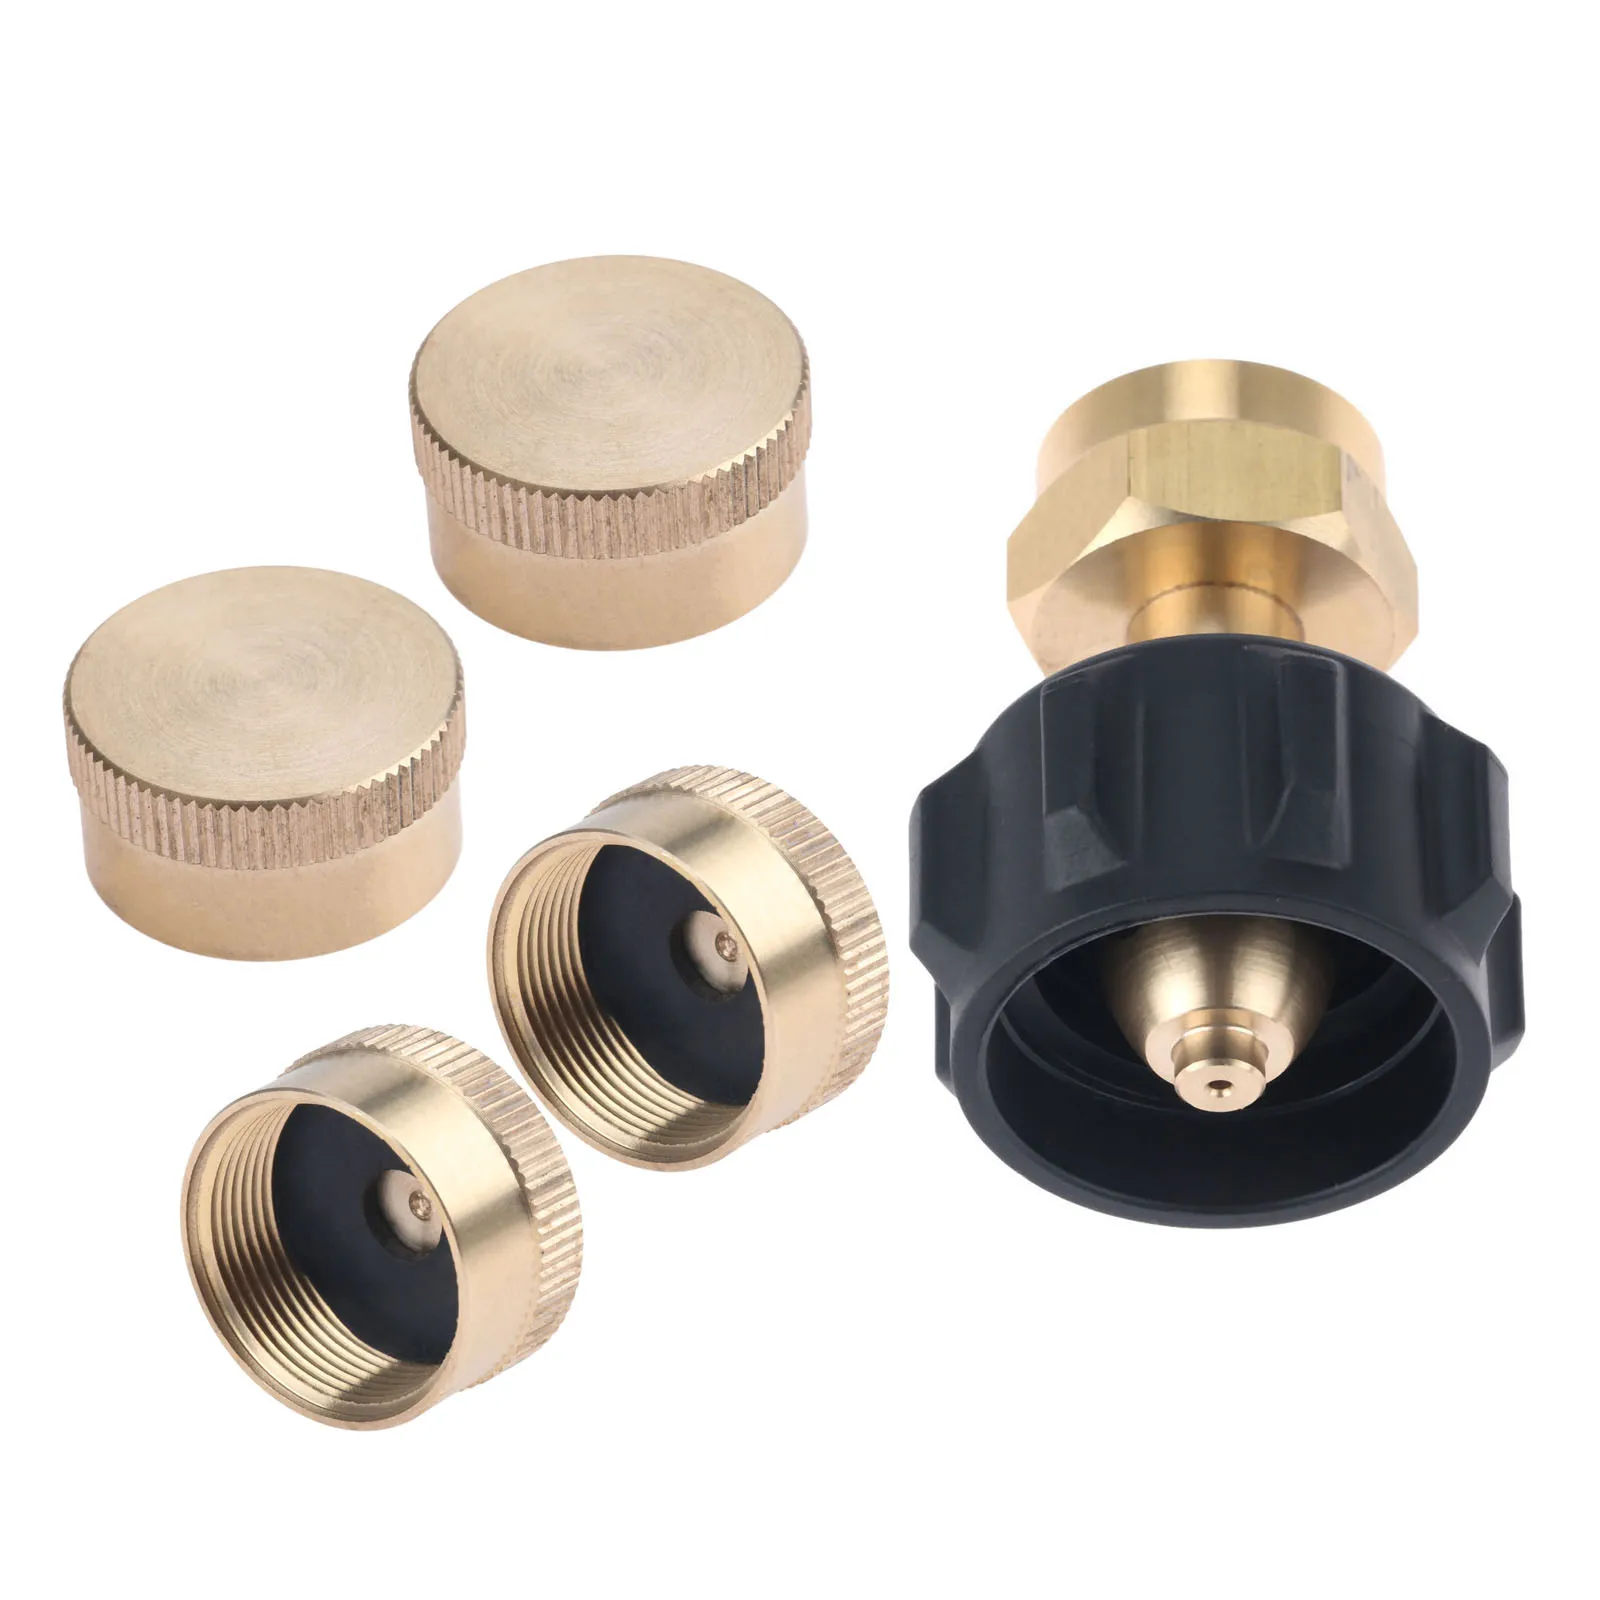 

Copper Alloy And ABS Propane Refill Adapter for QCC1 Tank and 1LB Gas Bottle Cylinder With 4pcs Propane Tank Protect Caps